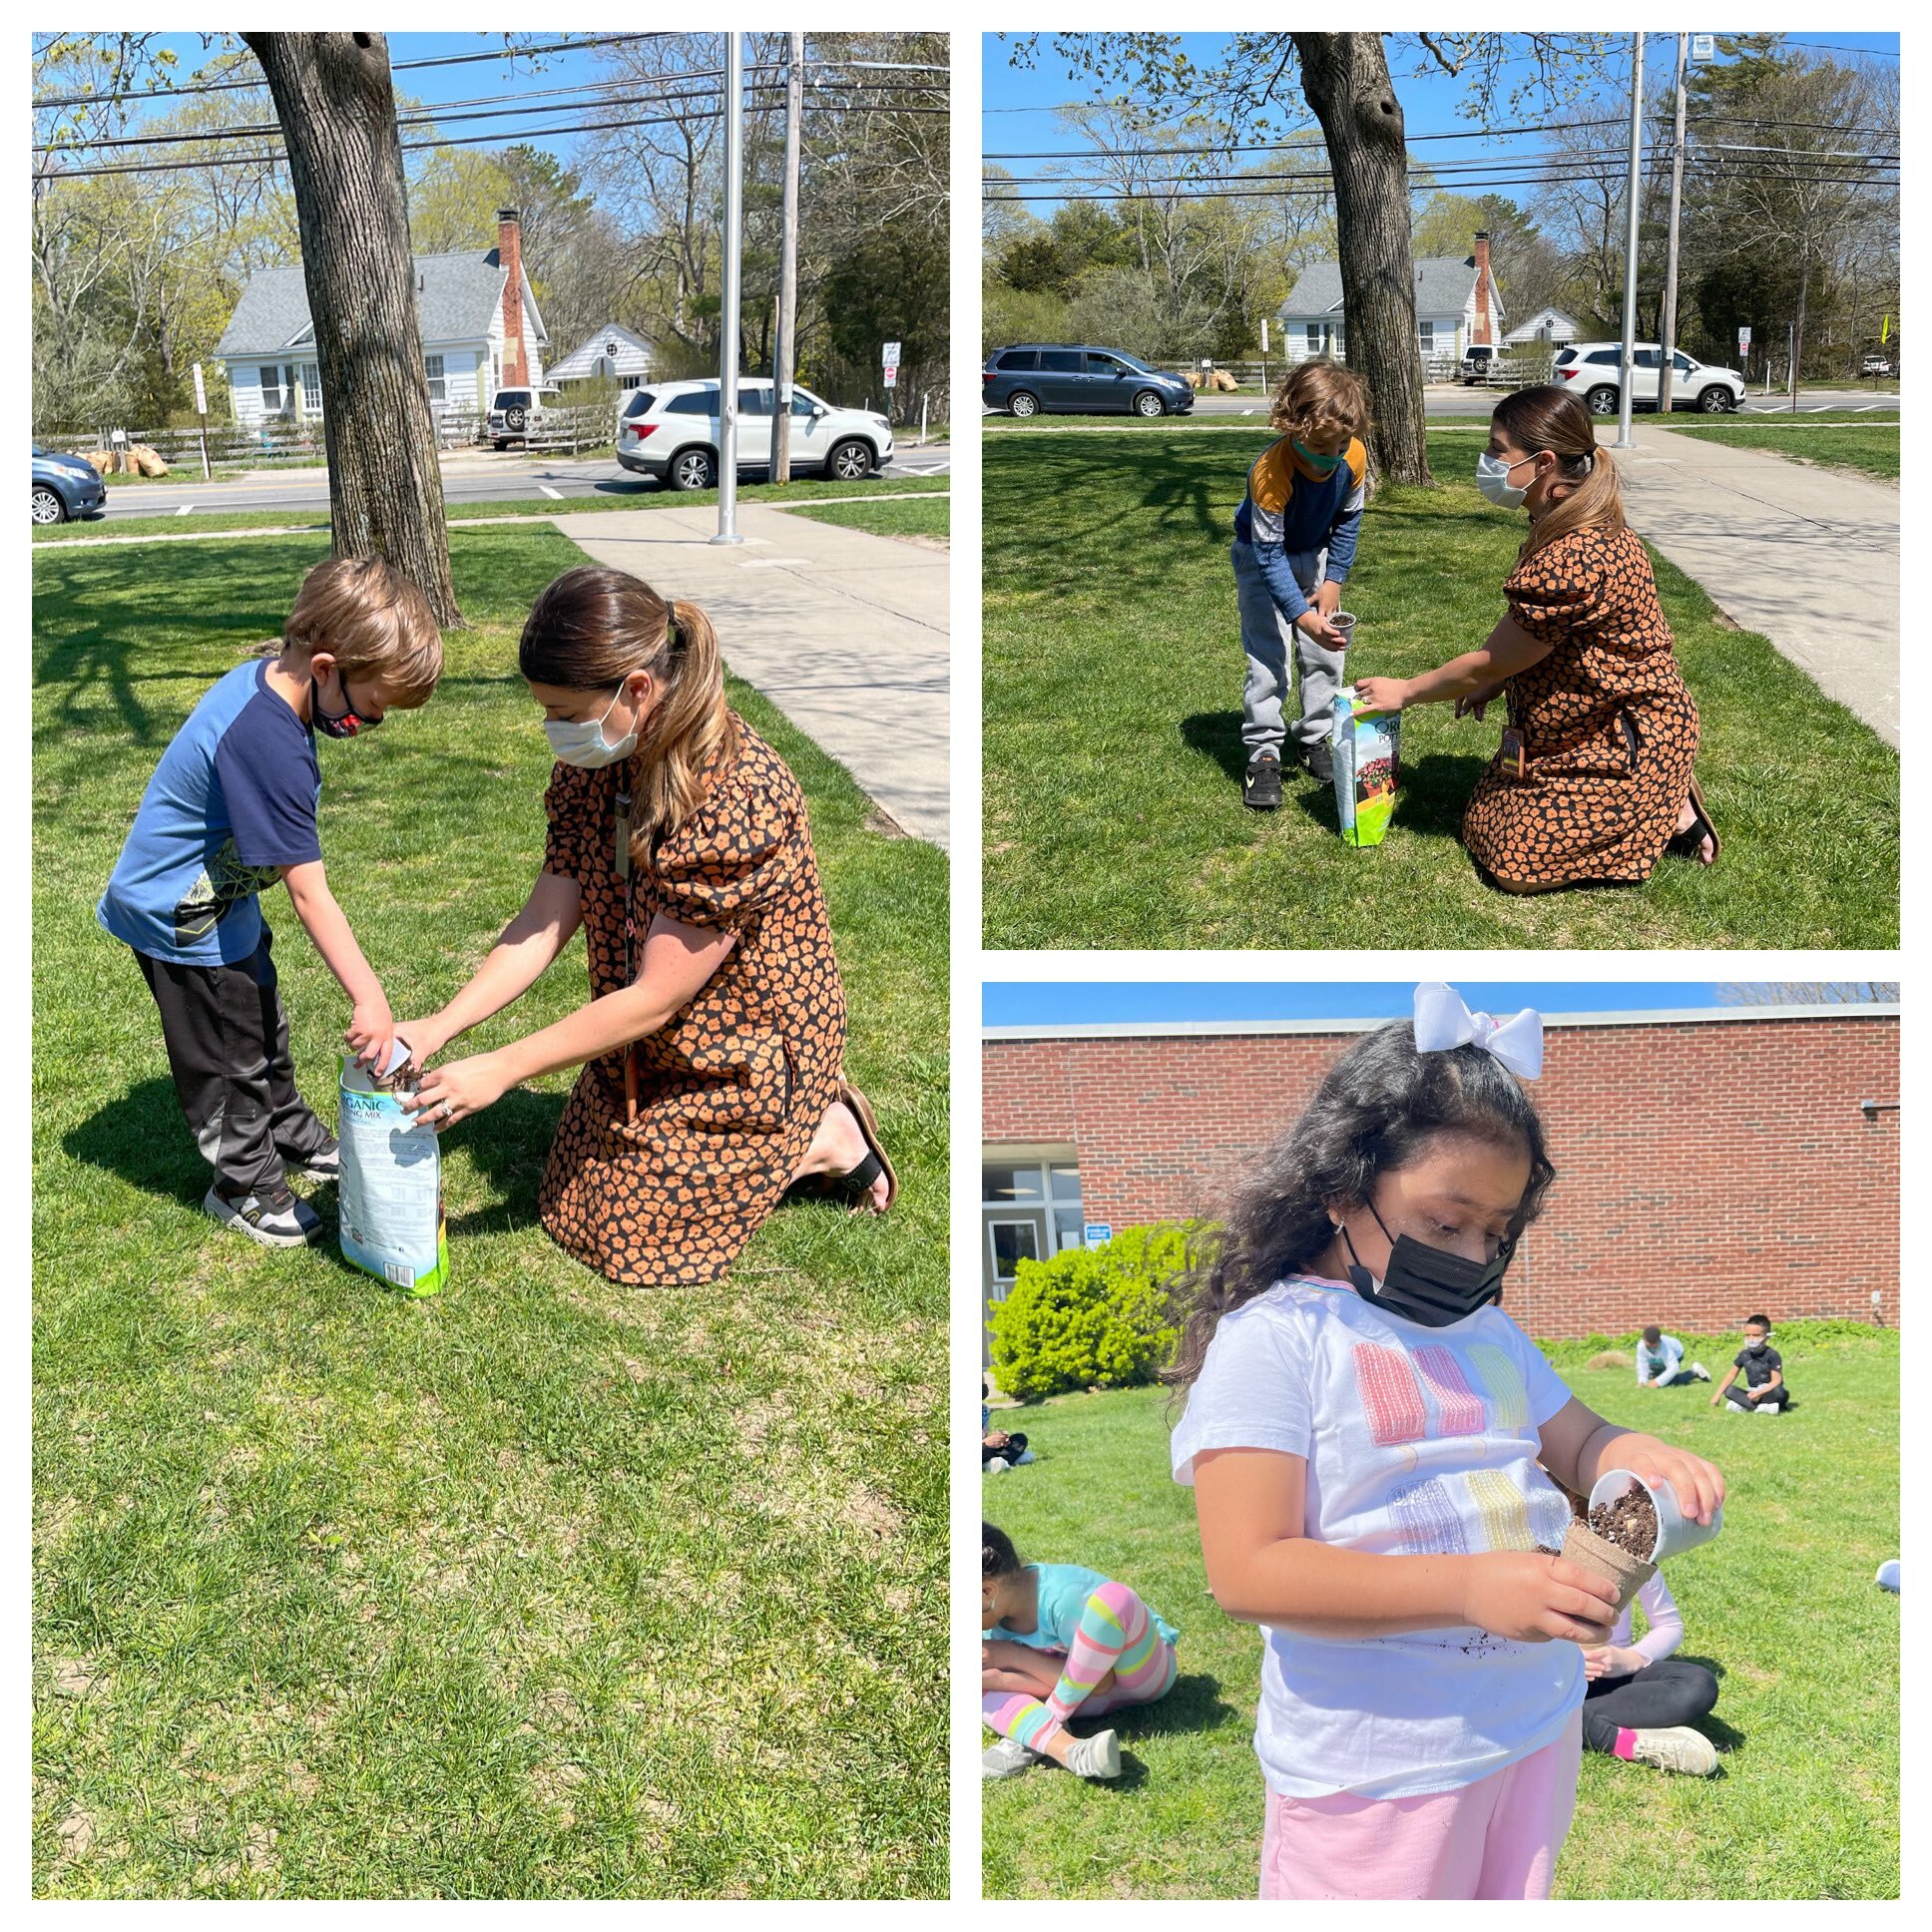 With the warmer weather, Hampton Bays Elementary School kindergartners have been busy learning about what plants need to grow by participating in various planting projects. The students in Morgan Tiska’s, Kathleen Palmieri’s and Megan Kappers’ classes, for example, planted flowers, while those in June Eaton’s class sowed grass seeds.